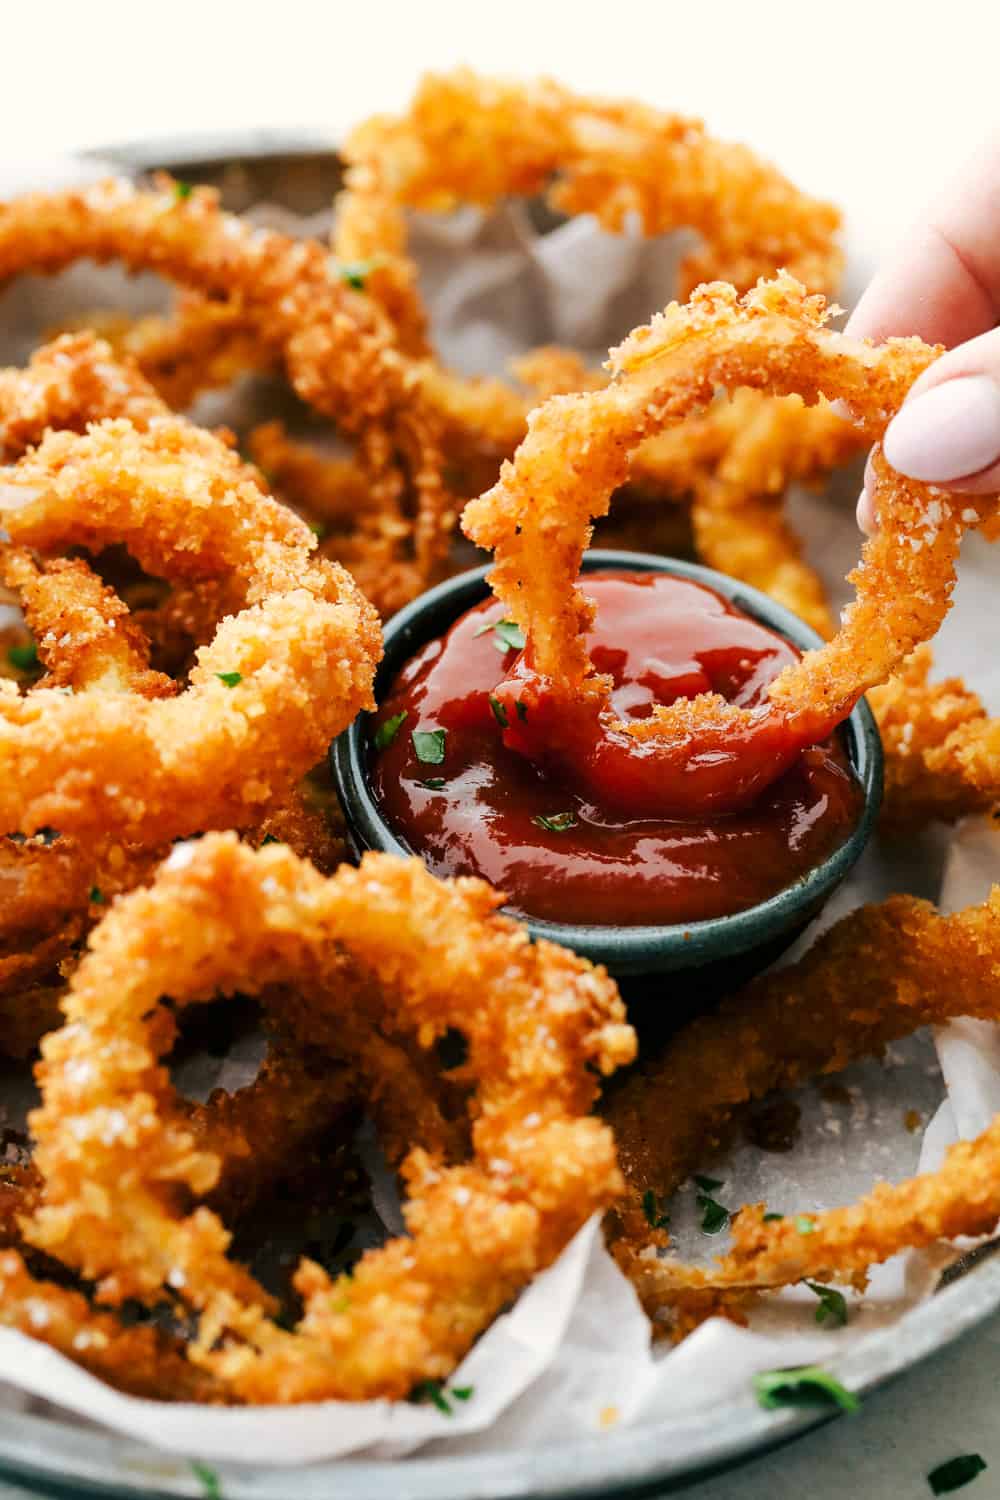 How To Keep Batter On Onion Rings - Treatbeyond2